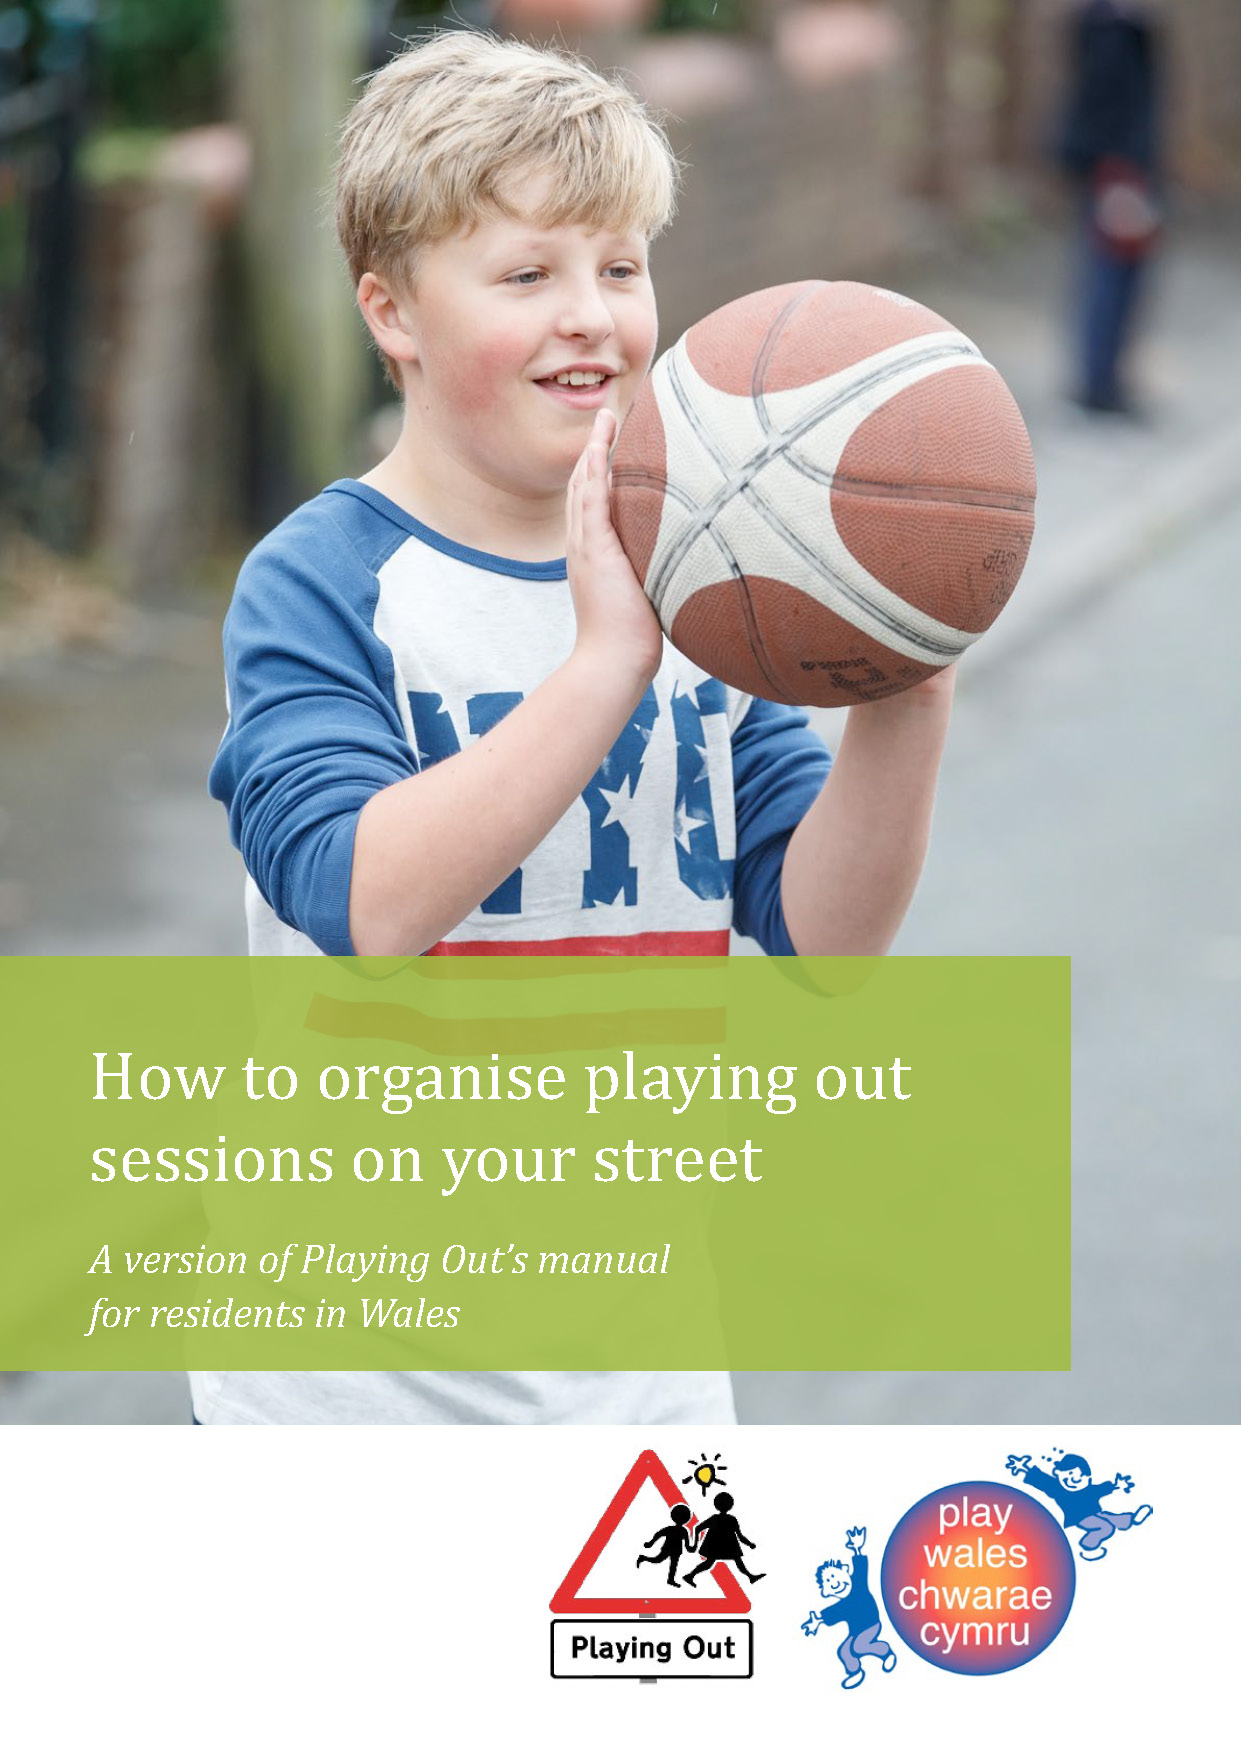 How to organise playing out sessions on your street